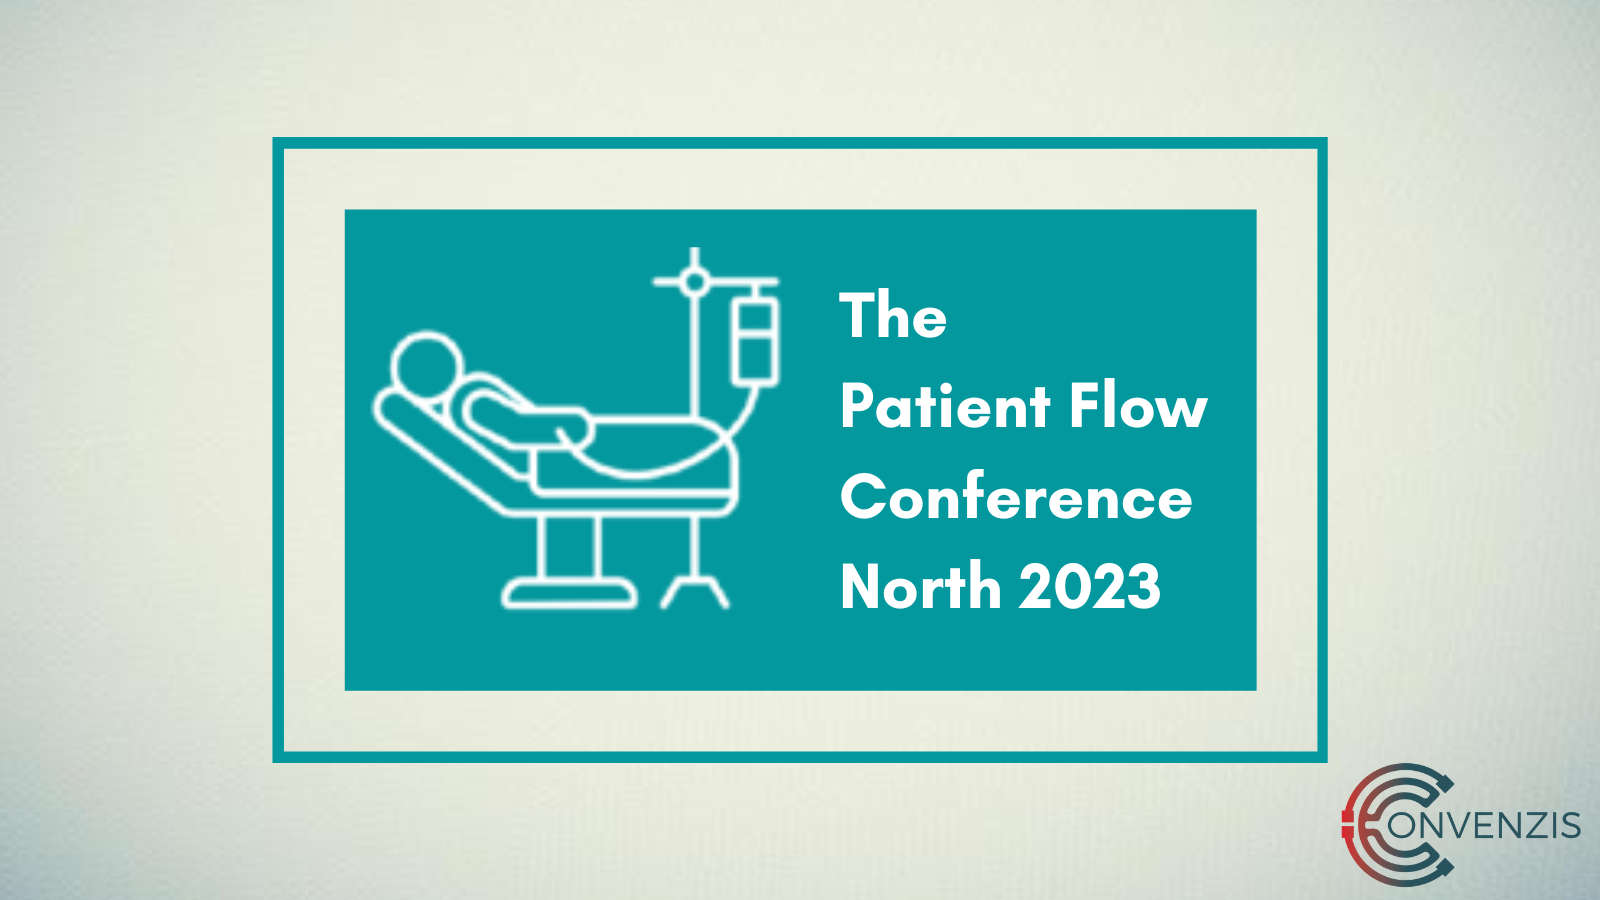 Convenzis - The Patient Flow Conference North 2023